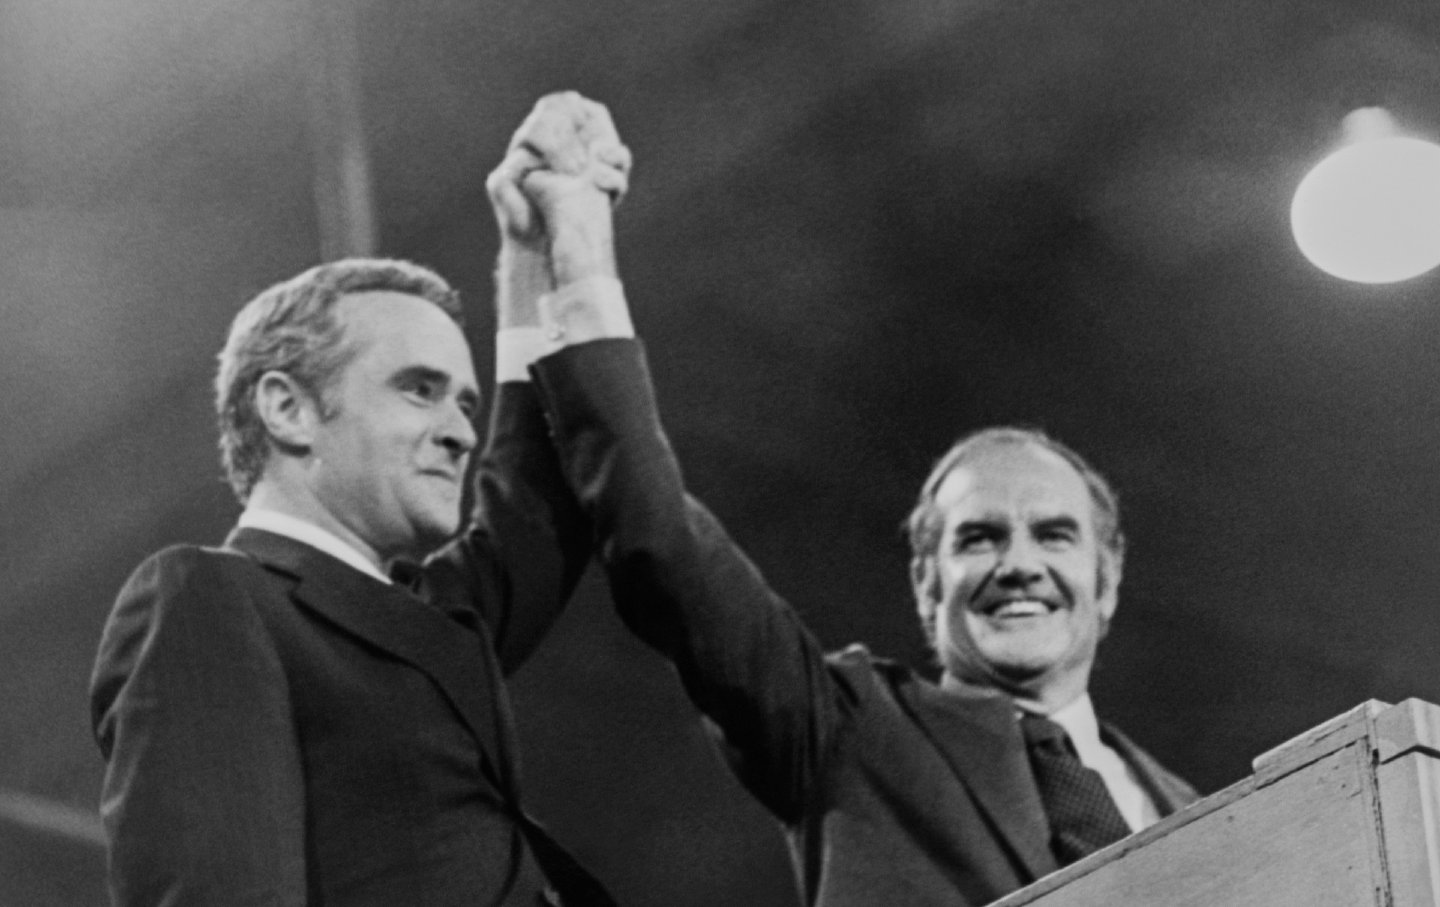 We Could Use a Leader Like George McGovern Again